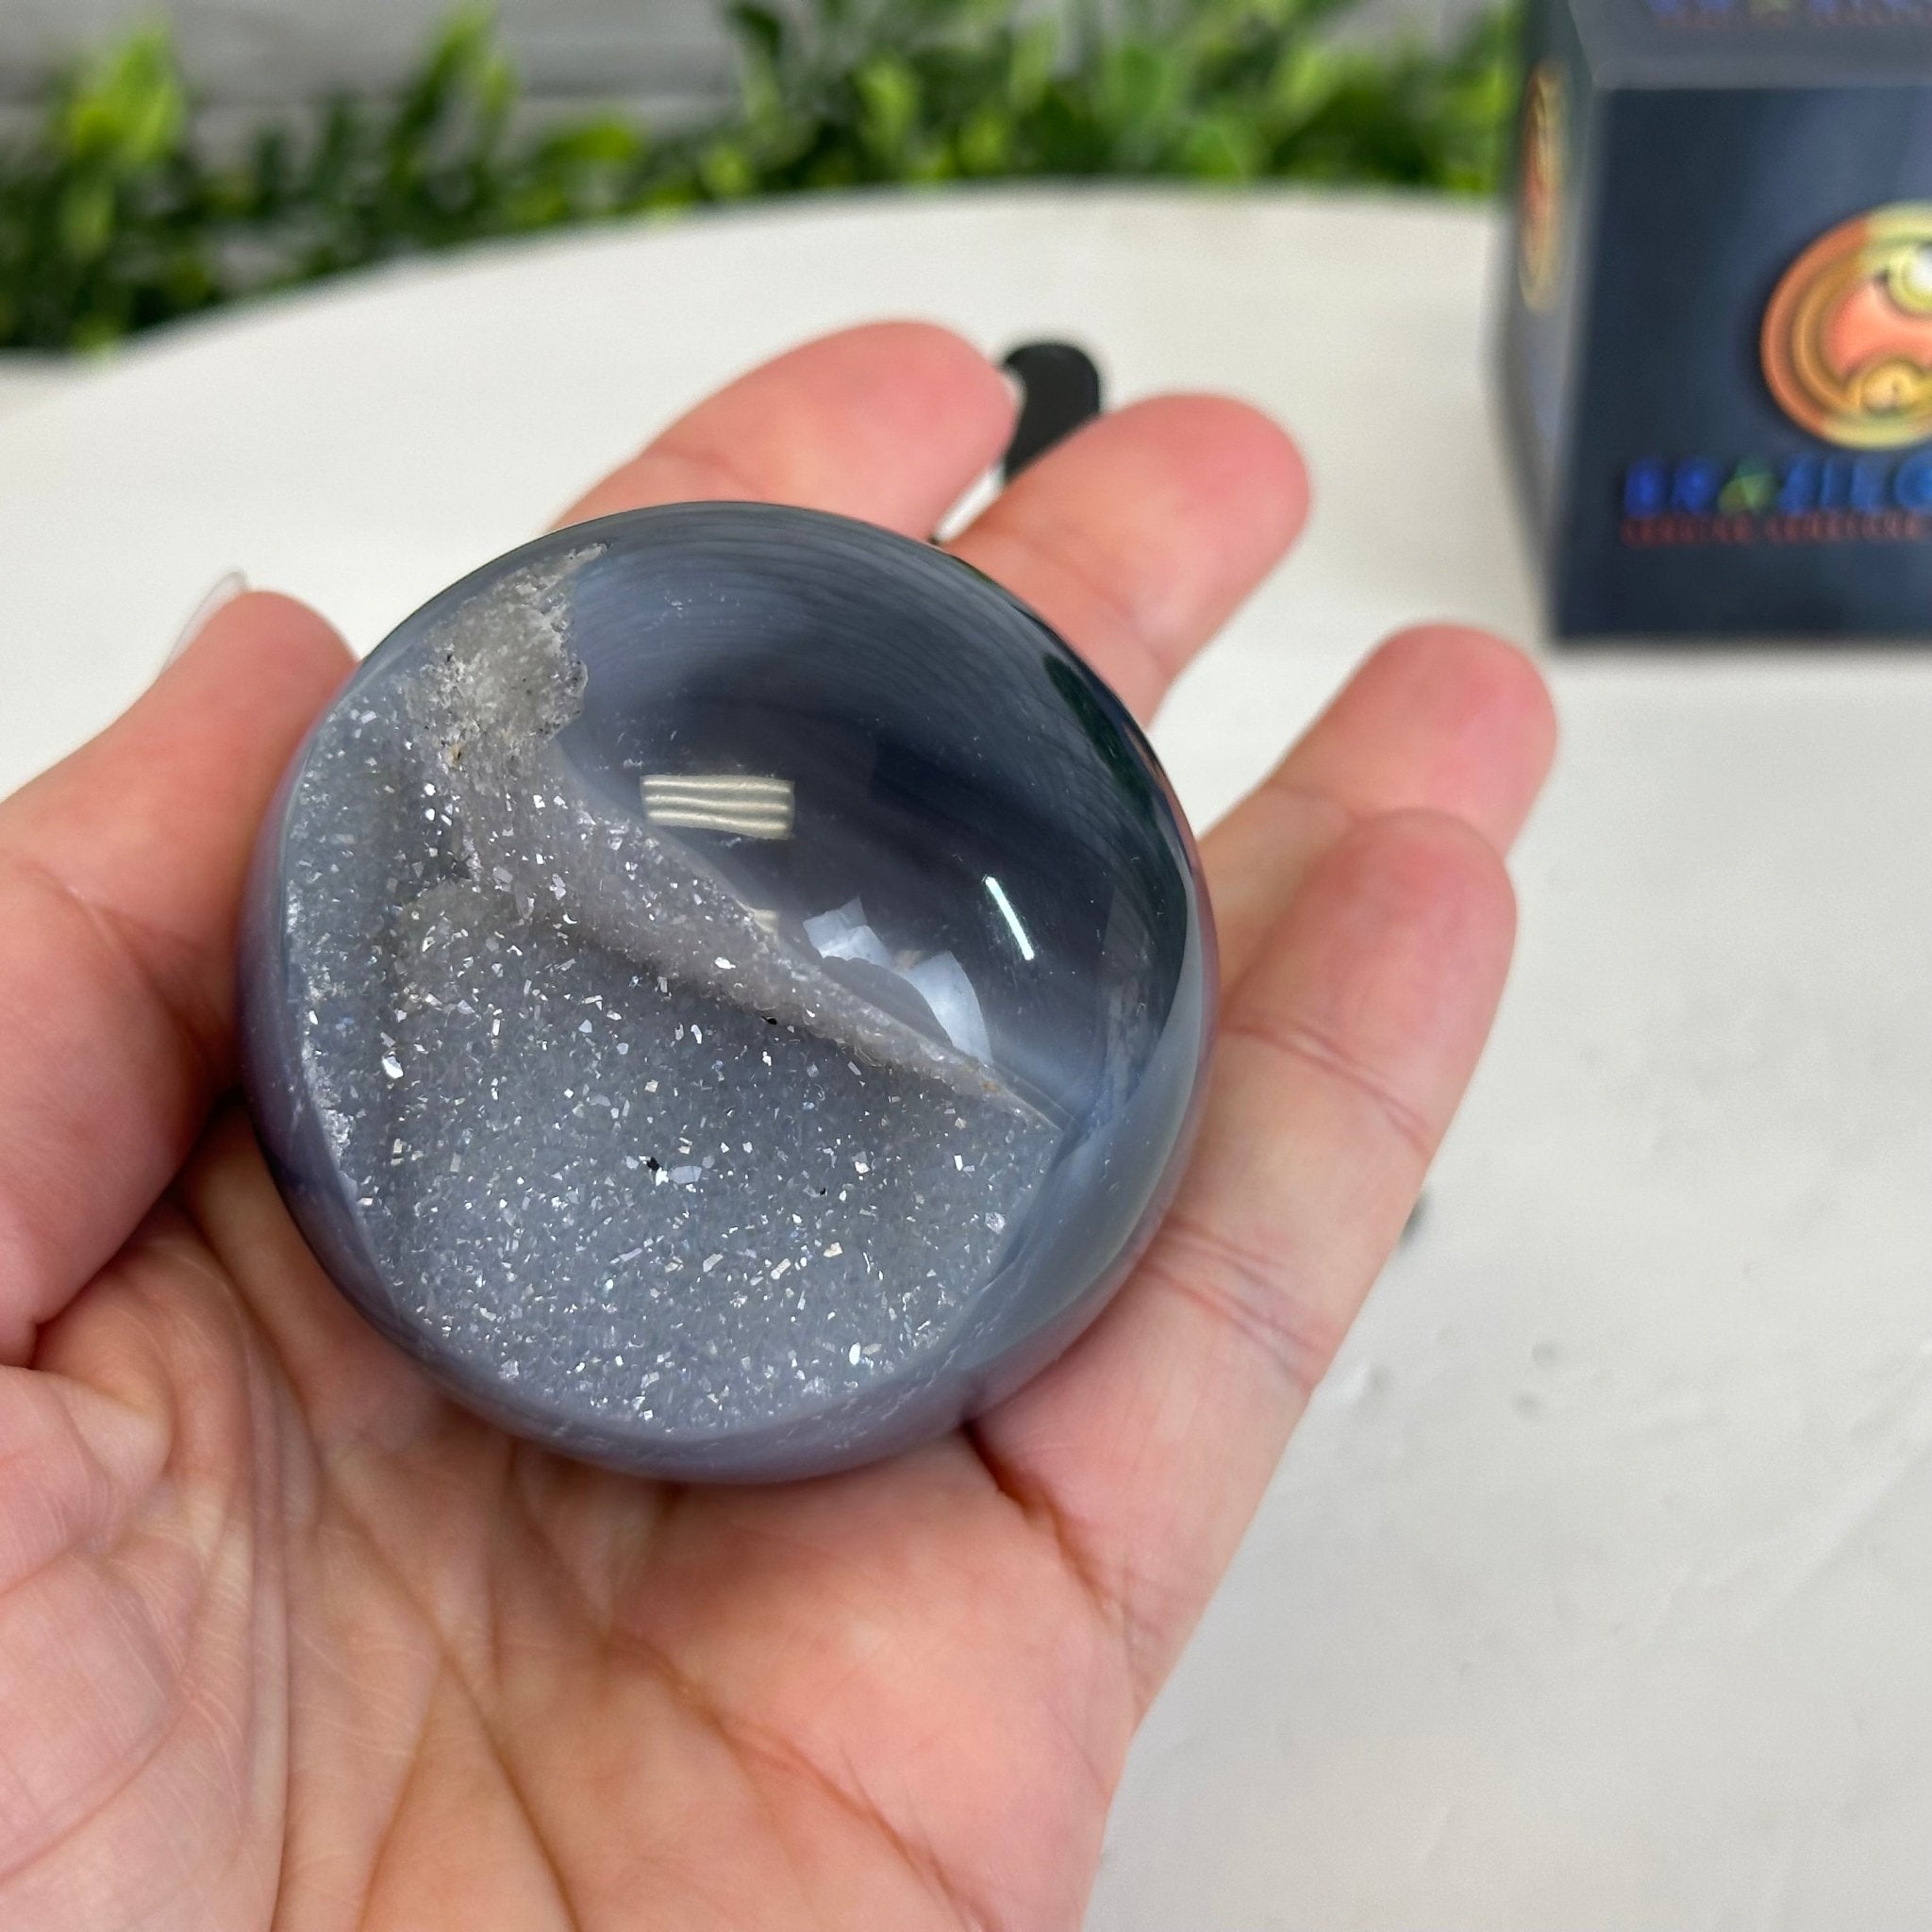 Druzy Agate Sphere on a Metal Stand, 0.5 lbs & 4.7" Tall #5634-0001 - Brazil GemsBrazil GemsDruzy Agate Sphere on a Metal Stand, 0.5 lbs & 4.7" Tall #5634-0001Spheres5634-0001